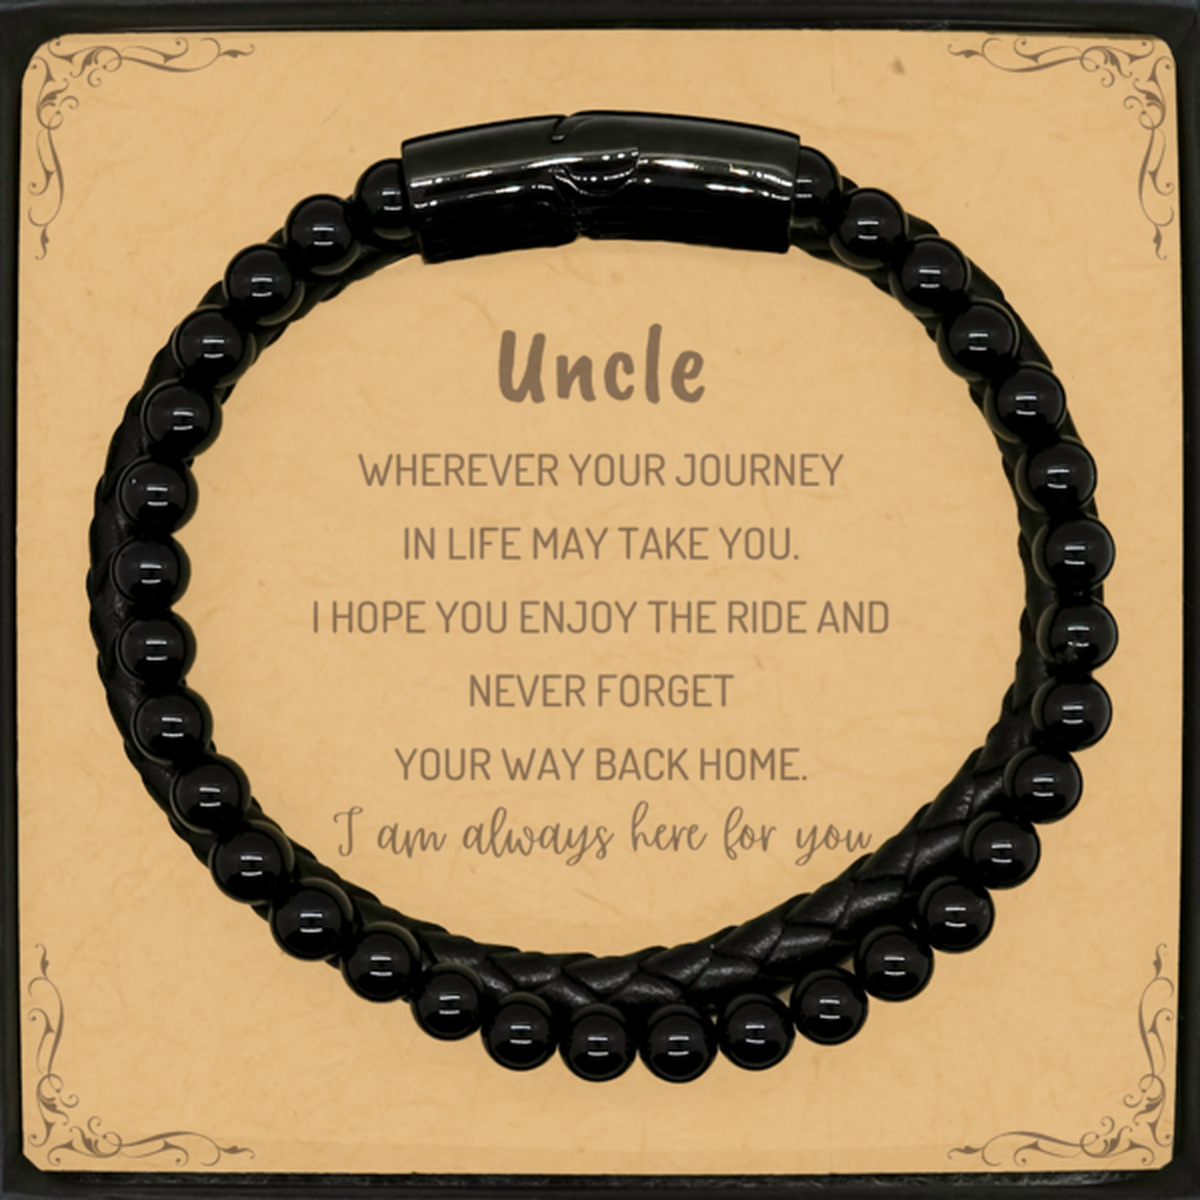 Uncle wherever your journey in life may take you, I am always here for you Uncle Stone Leather Bracelets, Awesome Christmas Gifts For Uncle Message Card, Uncle Birthday Gifts for Men Women Family Loved One